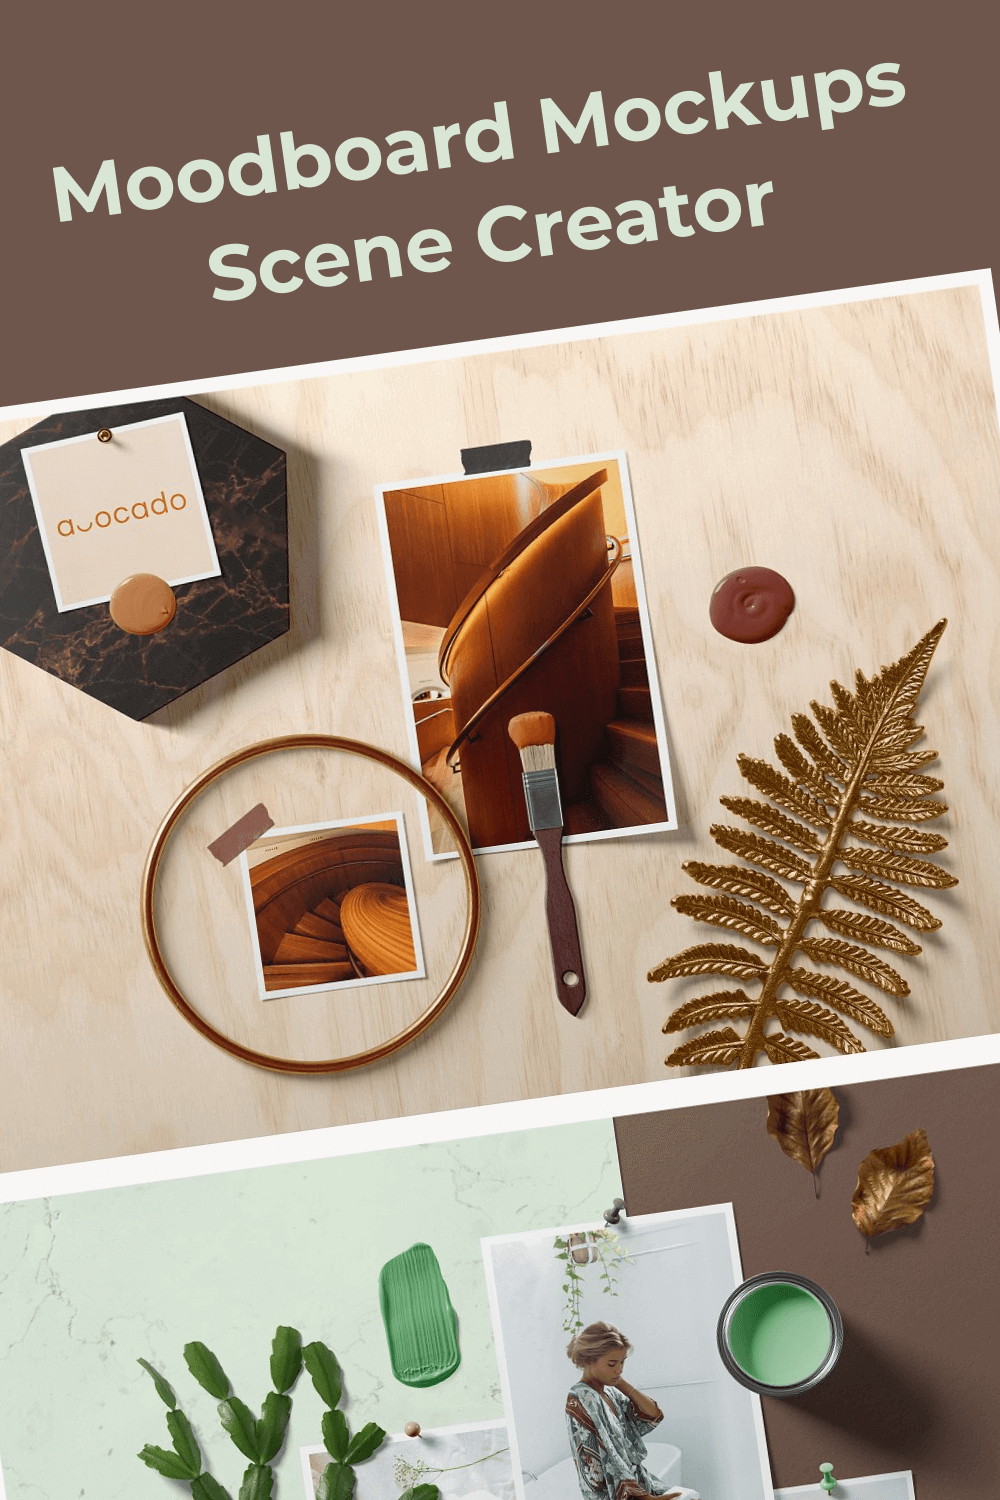 Brown, Gold and Green Elements are Created in Moodboard Mockups Scene Creator.